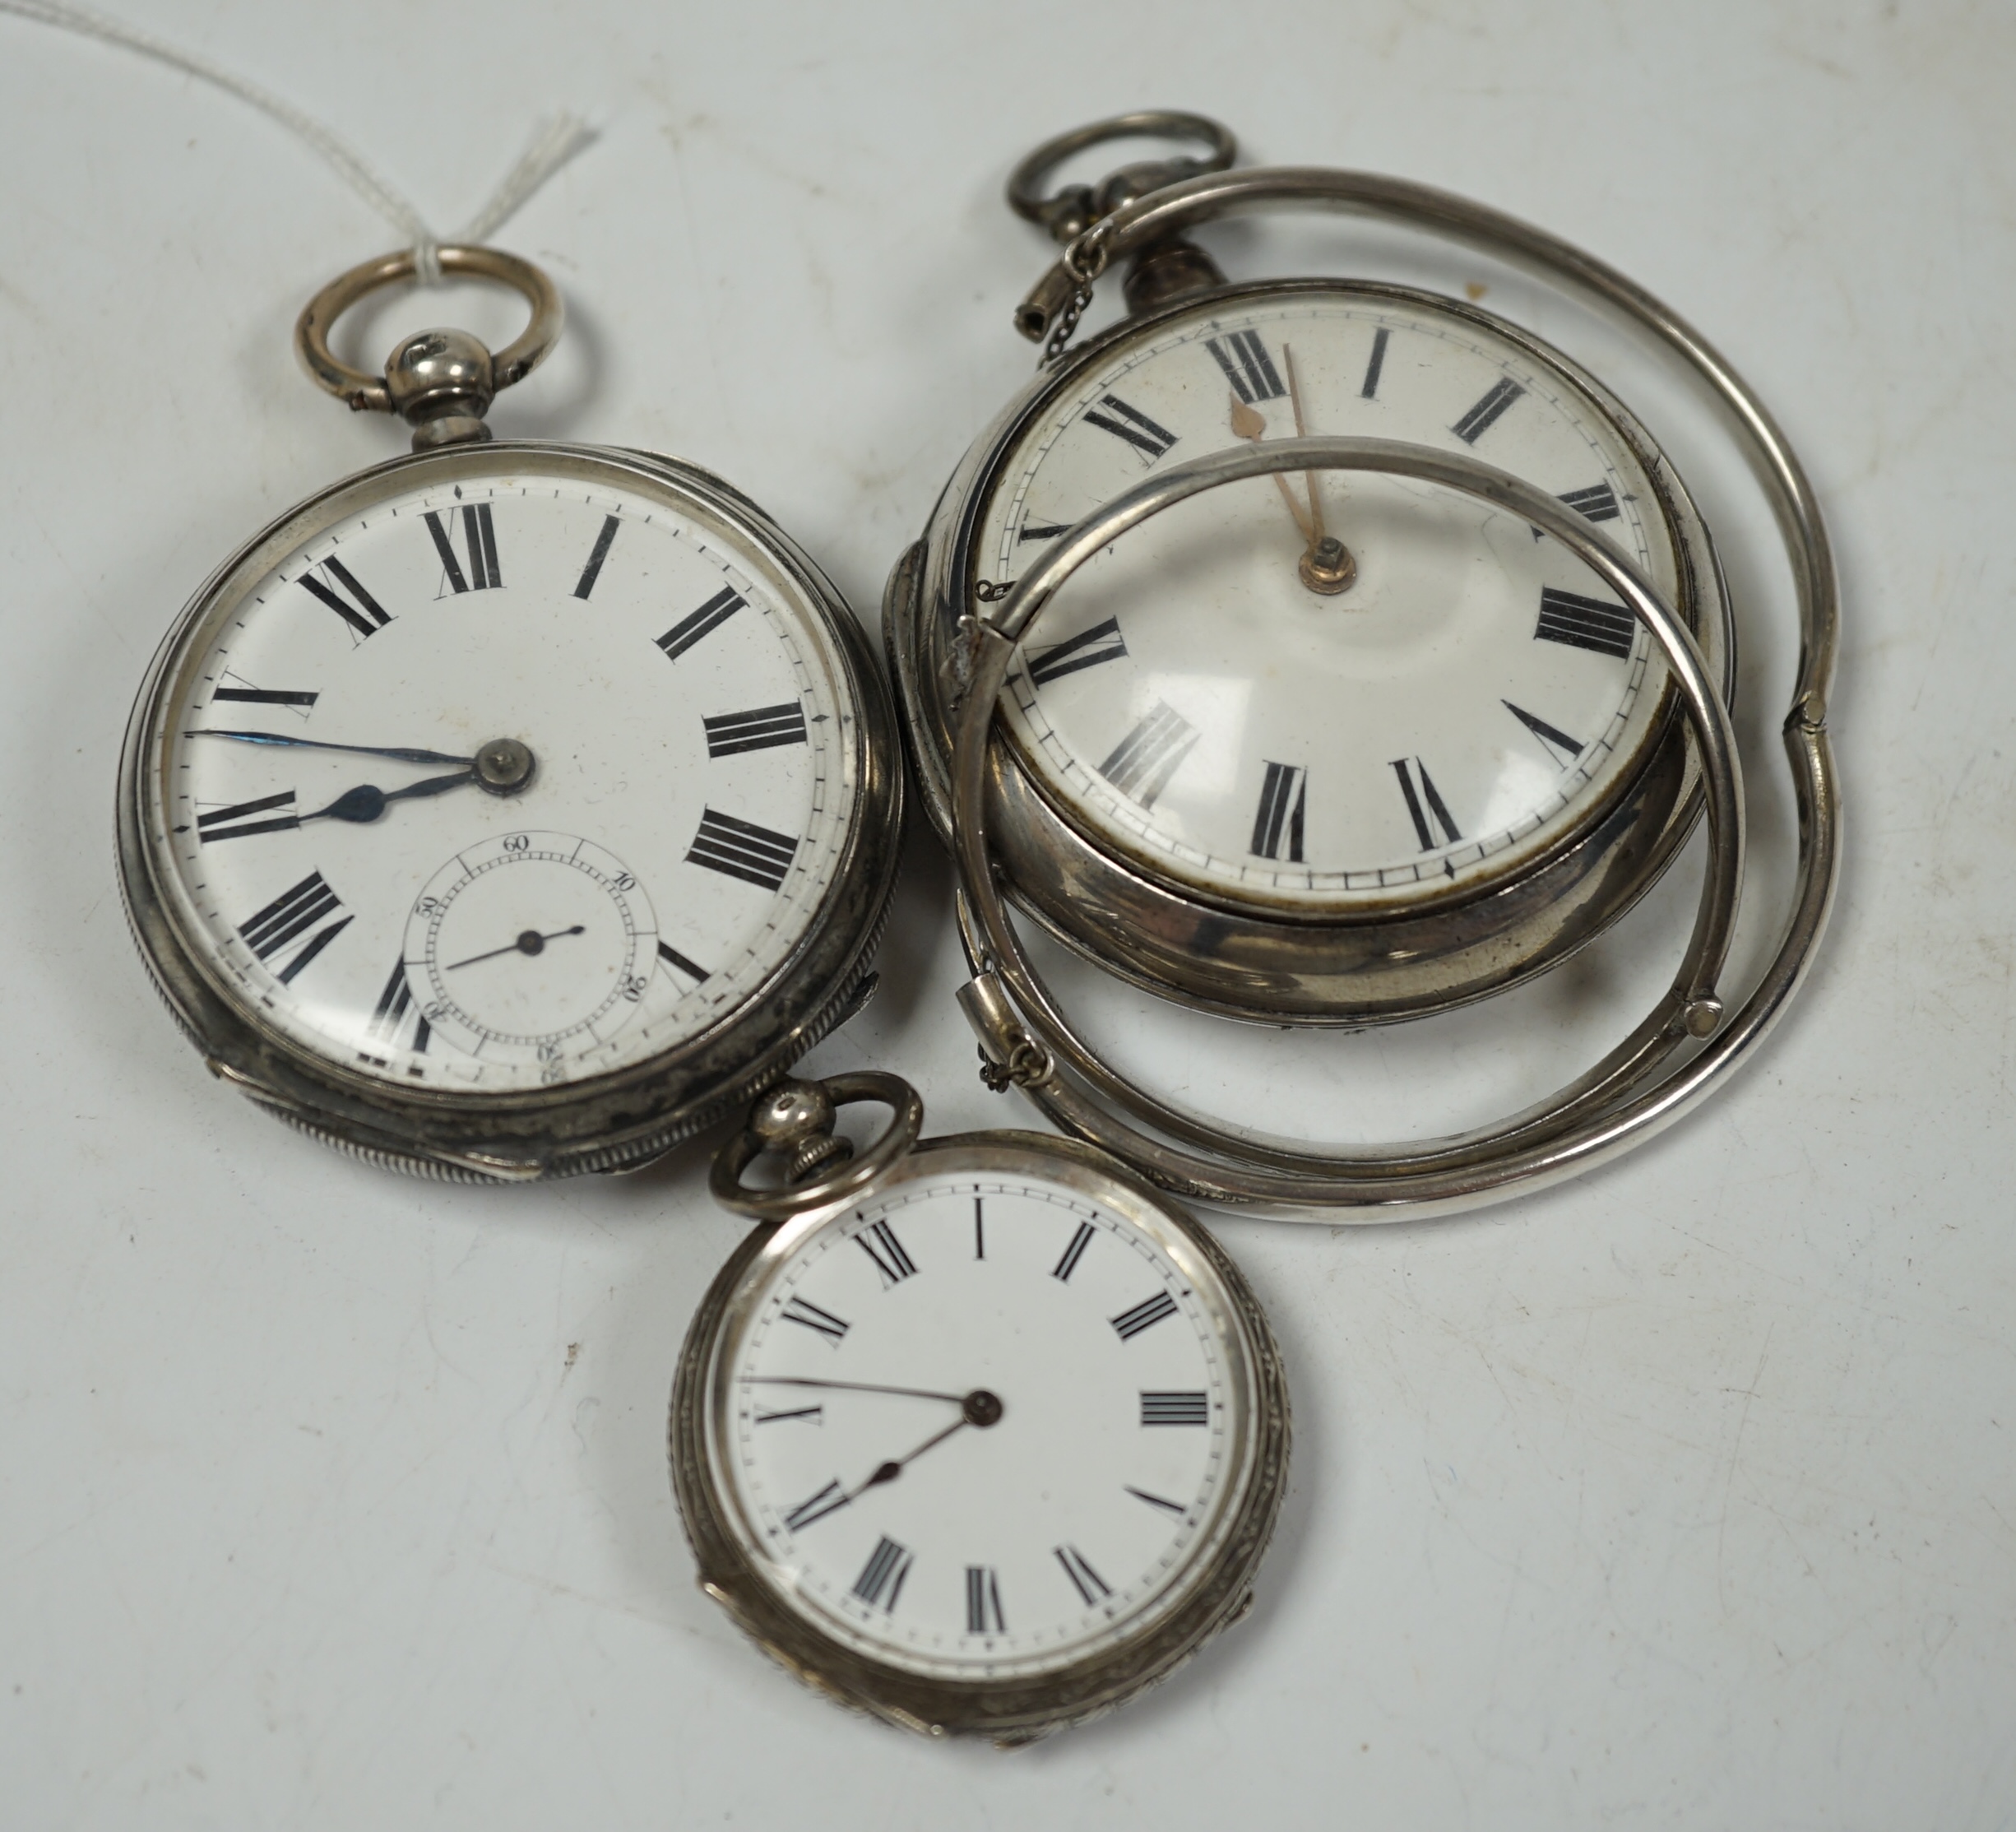 A George III silver pair cased verge key wind pocket watch, by John Thomas, London, one other later silver pocket watch, a white metal fob watch and two silver hinged bangles.